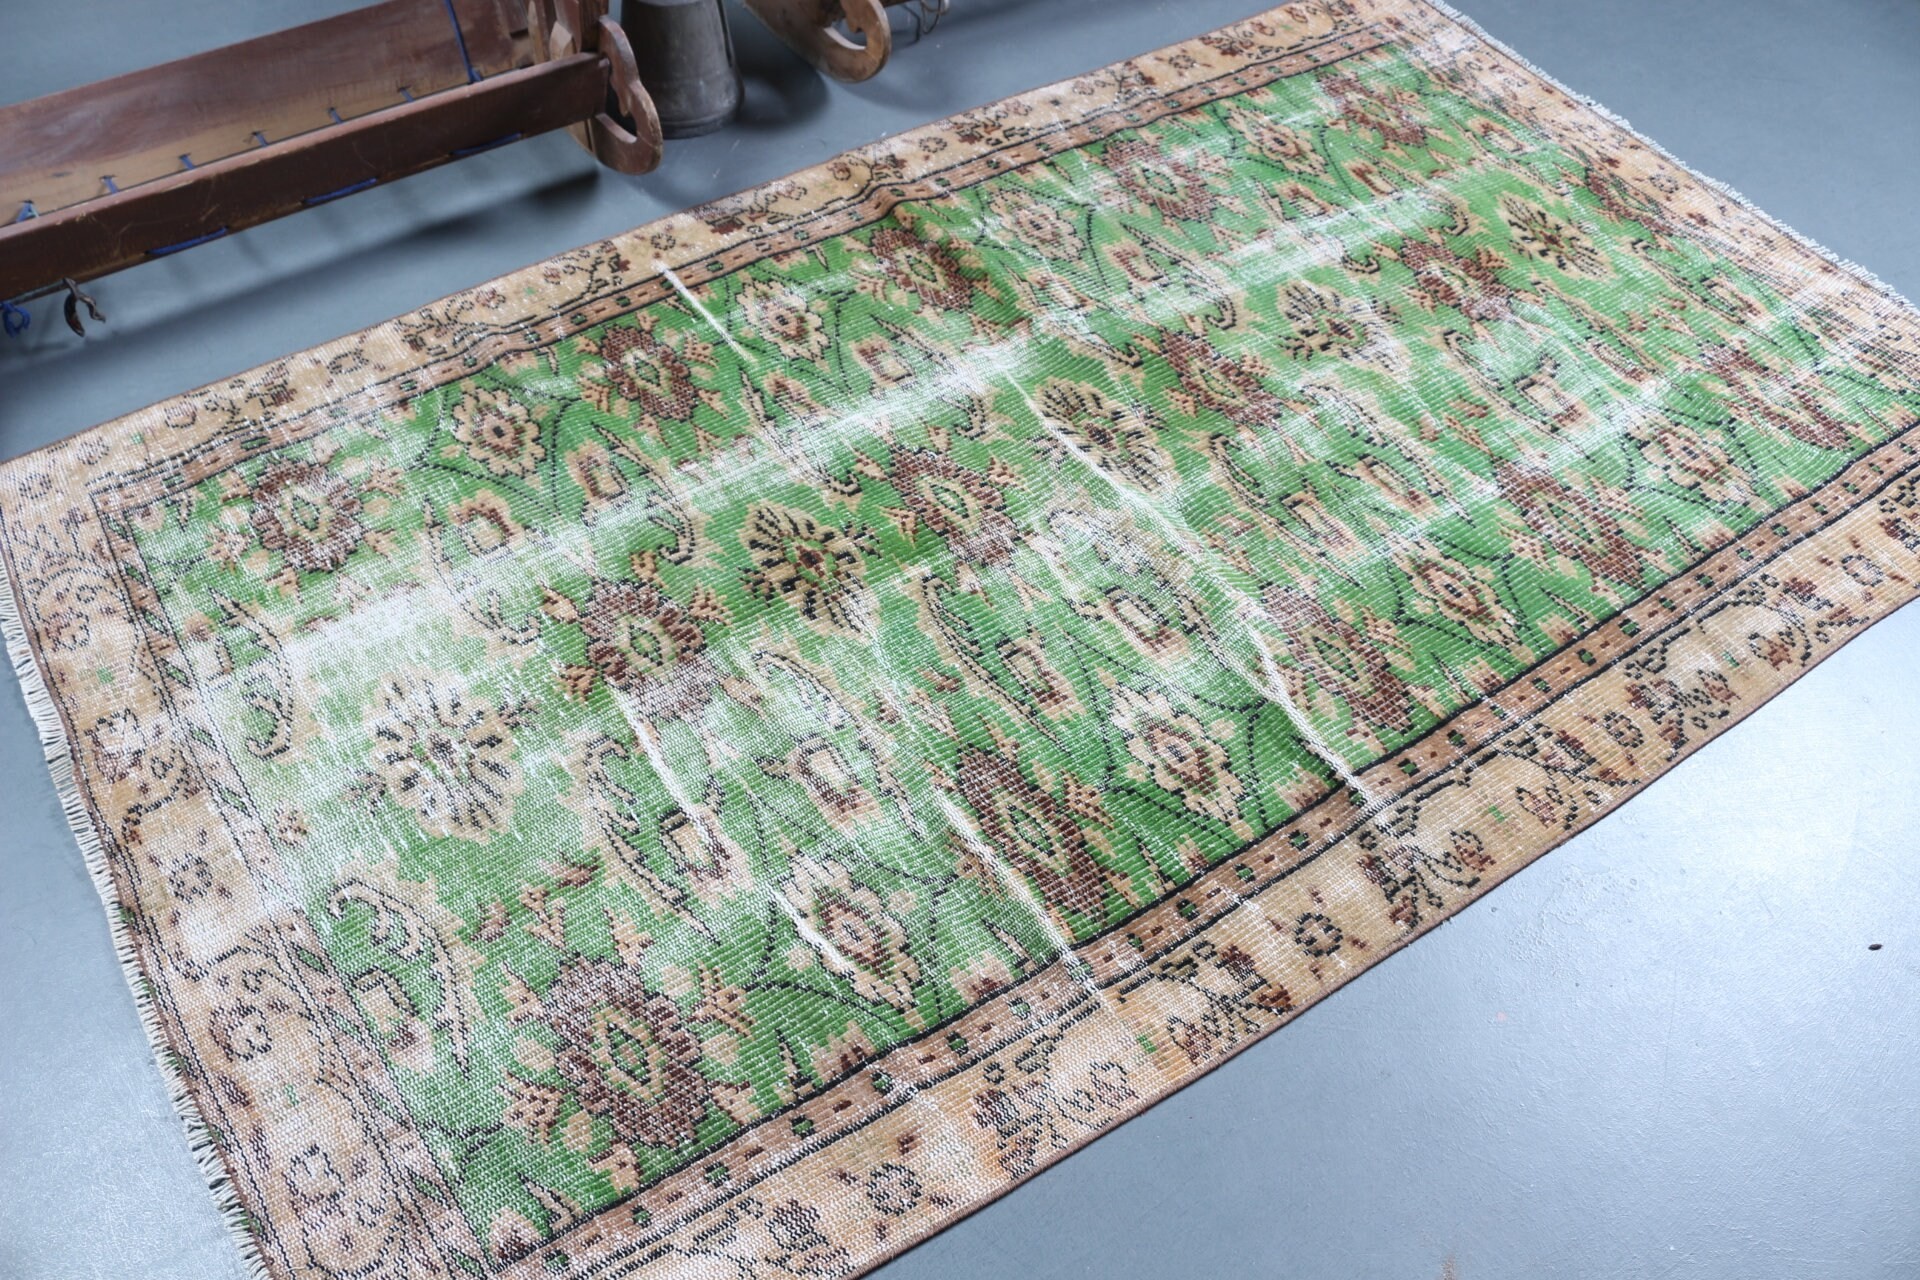 Rugs for Dining Room, Moroccan Rug, Retro Rug, Kitchen Rug, Green Bedroom Rugs, Vintage Rug, 4.4x7.7 ft Area Rugs, Turkish Rug, Cool Rugs